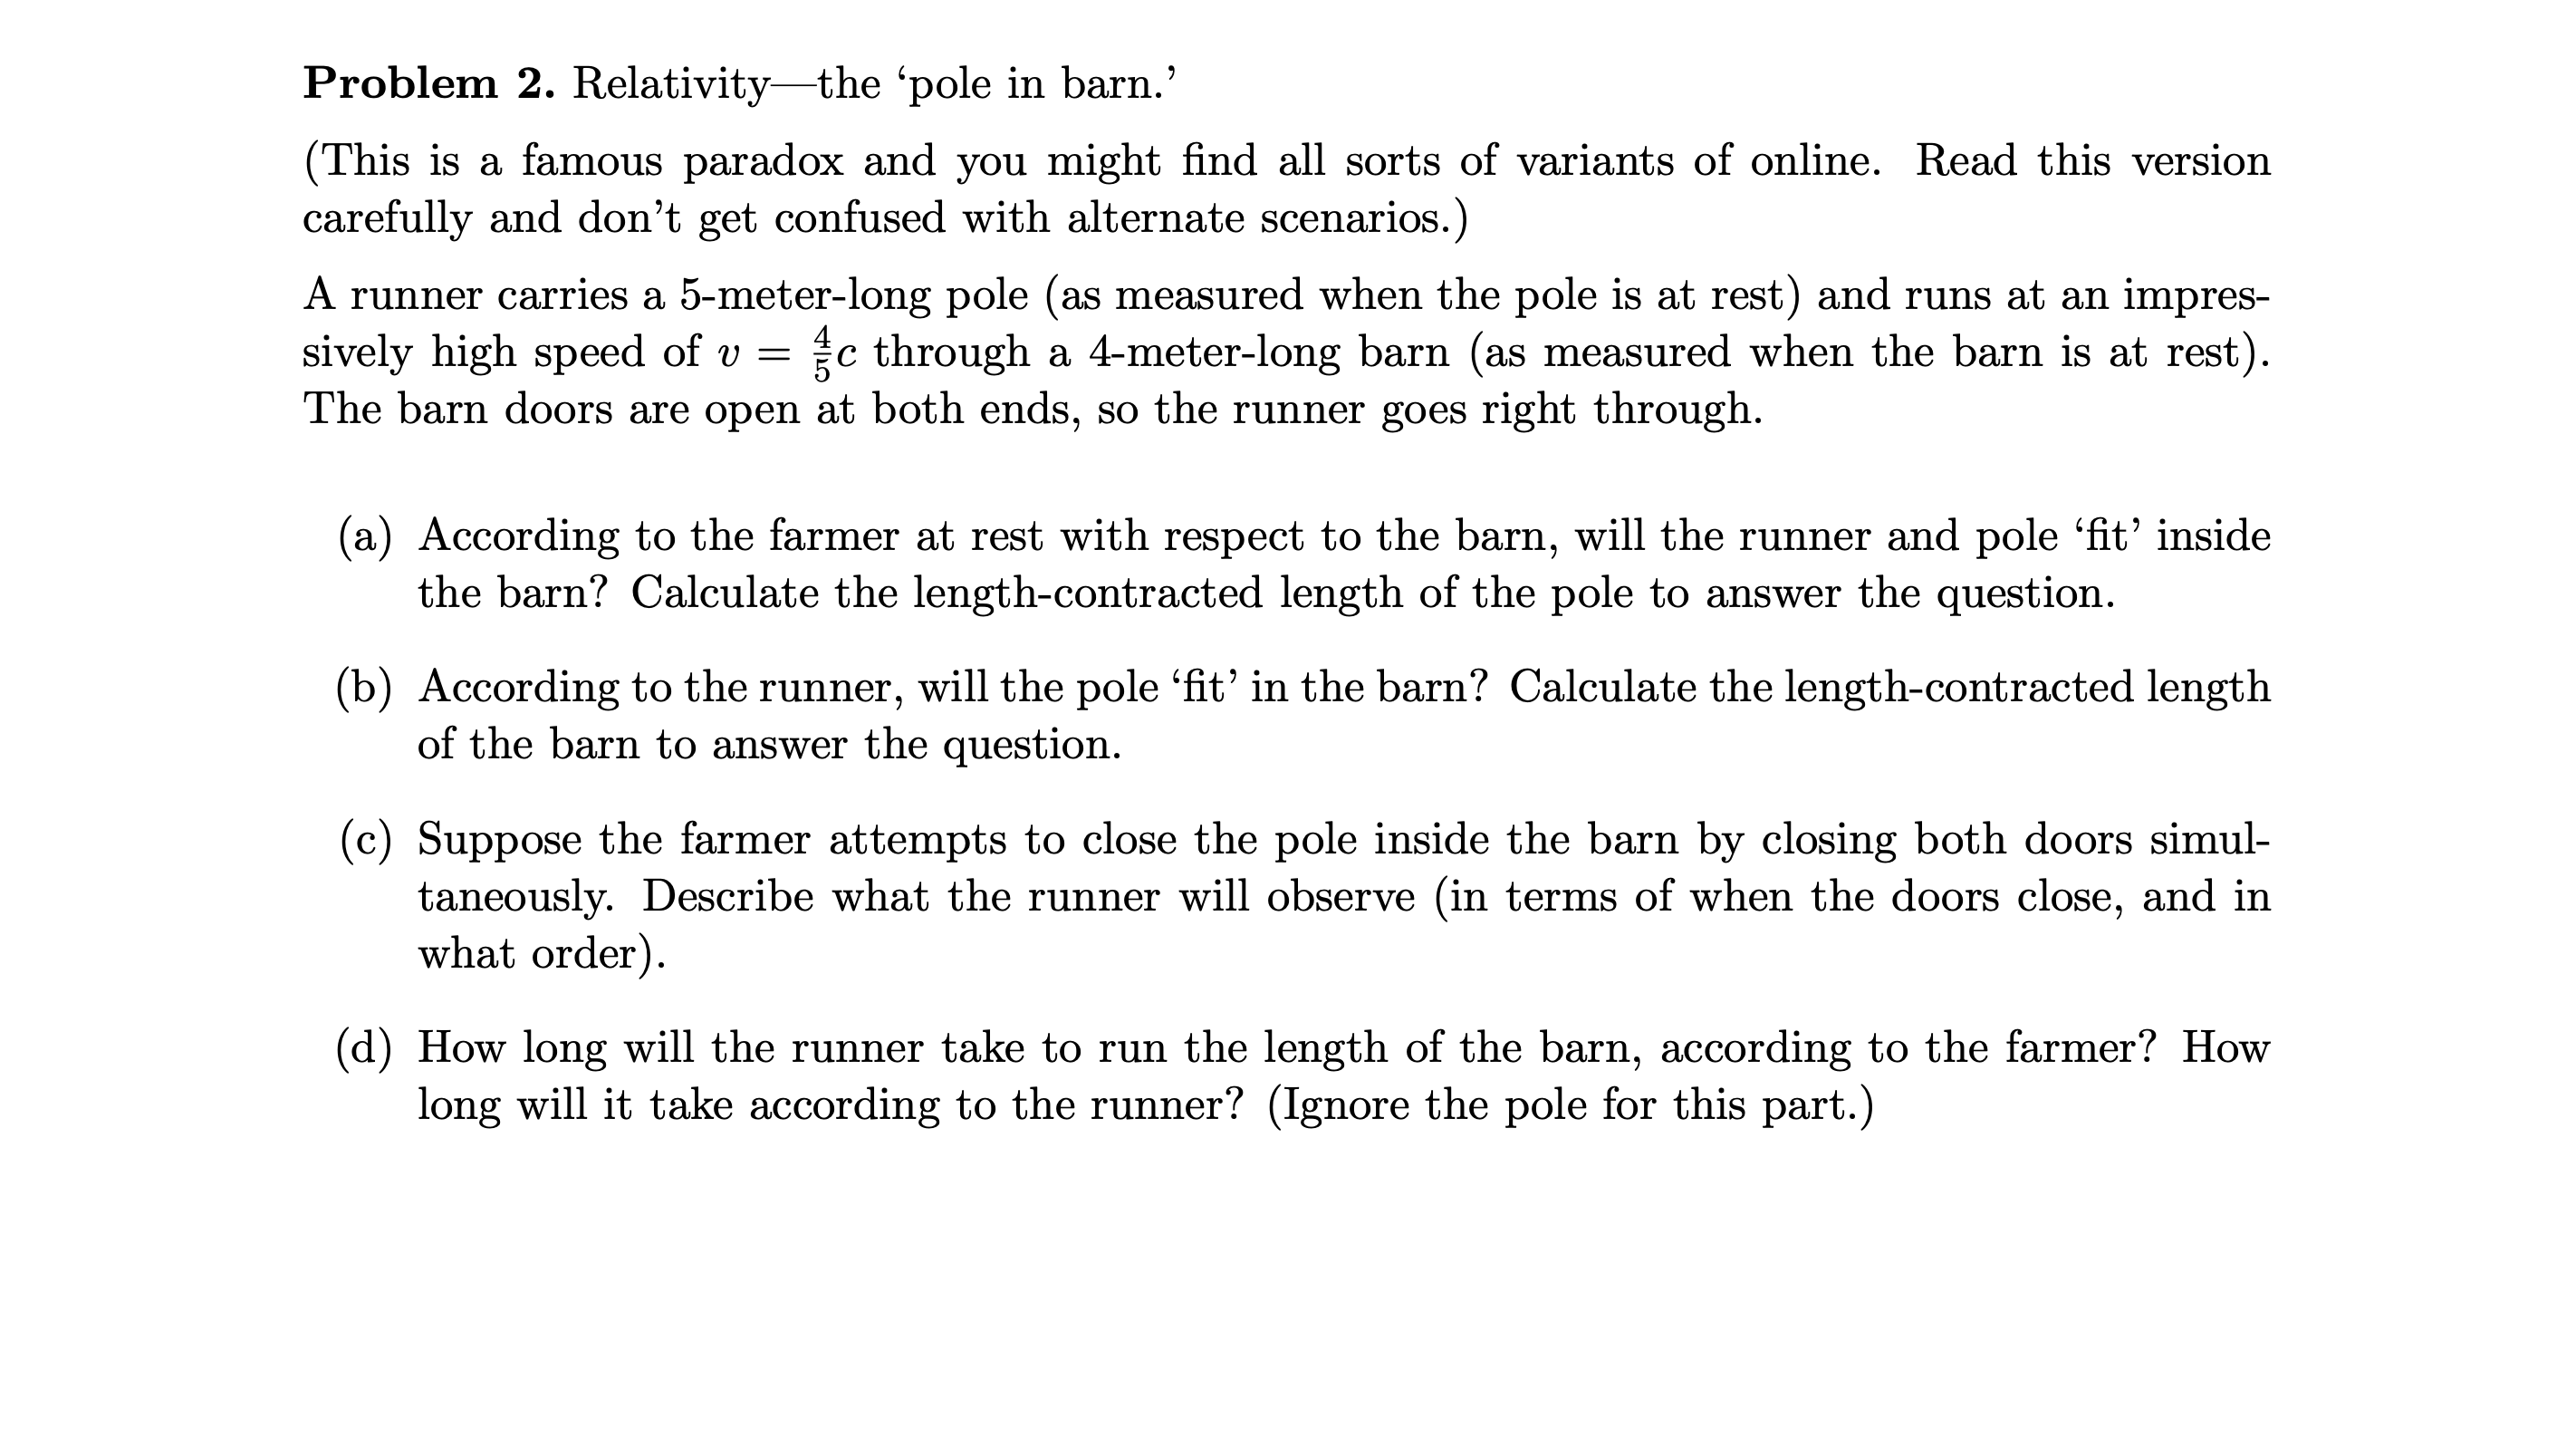 Problem 2. Relativity-the 'pole in barn.'
(This is a famous paradox and you might find all sorts of variants of online. Read this version
carefully and don't get confused with alternate scenarios.)
A runner carries a 5-meter-long pole (as measured when the pole is at rest) and runs at an impres-
sively high speed of v = c through a 4-meter-long barn (as measured when the barn is at rest).
The barn doors are open at both ends, so the runner goes right through.
(a) According to the farmer at rest with respect to the barn, will the runner and pole 'fit' inside
the barn? Calculate the length-contracted length of the pole to answer the question.
